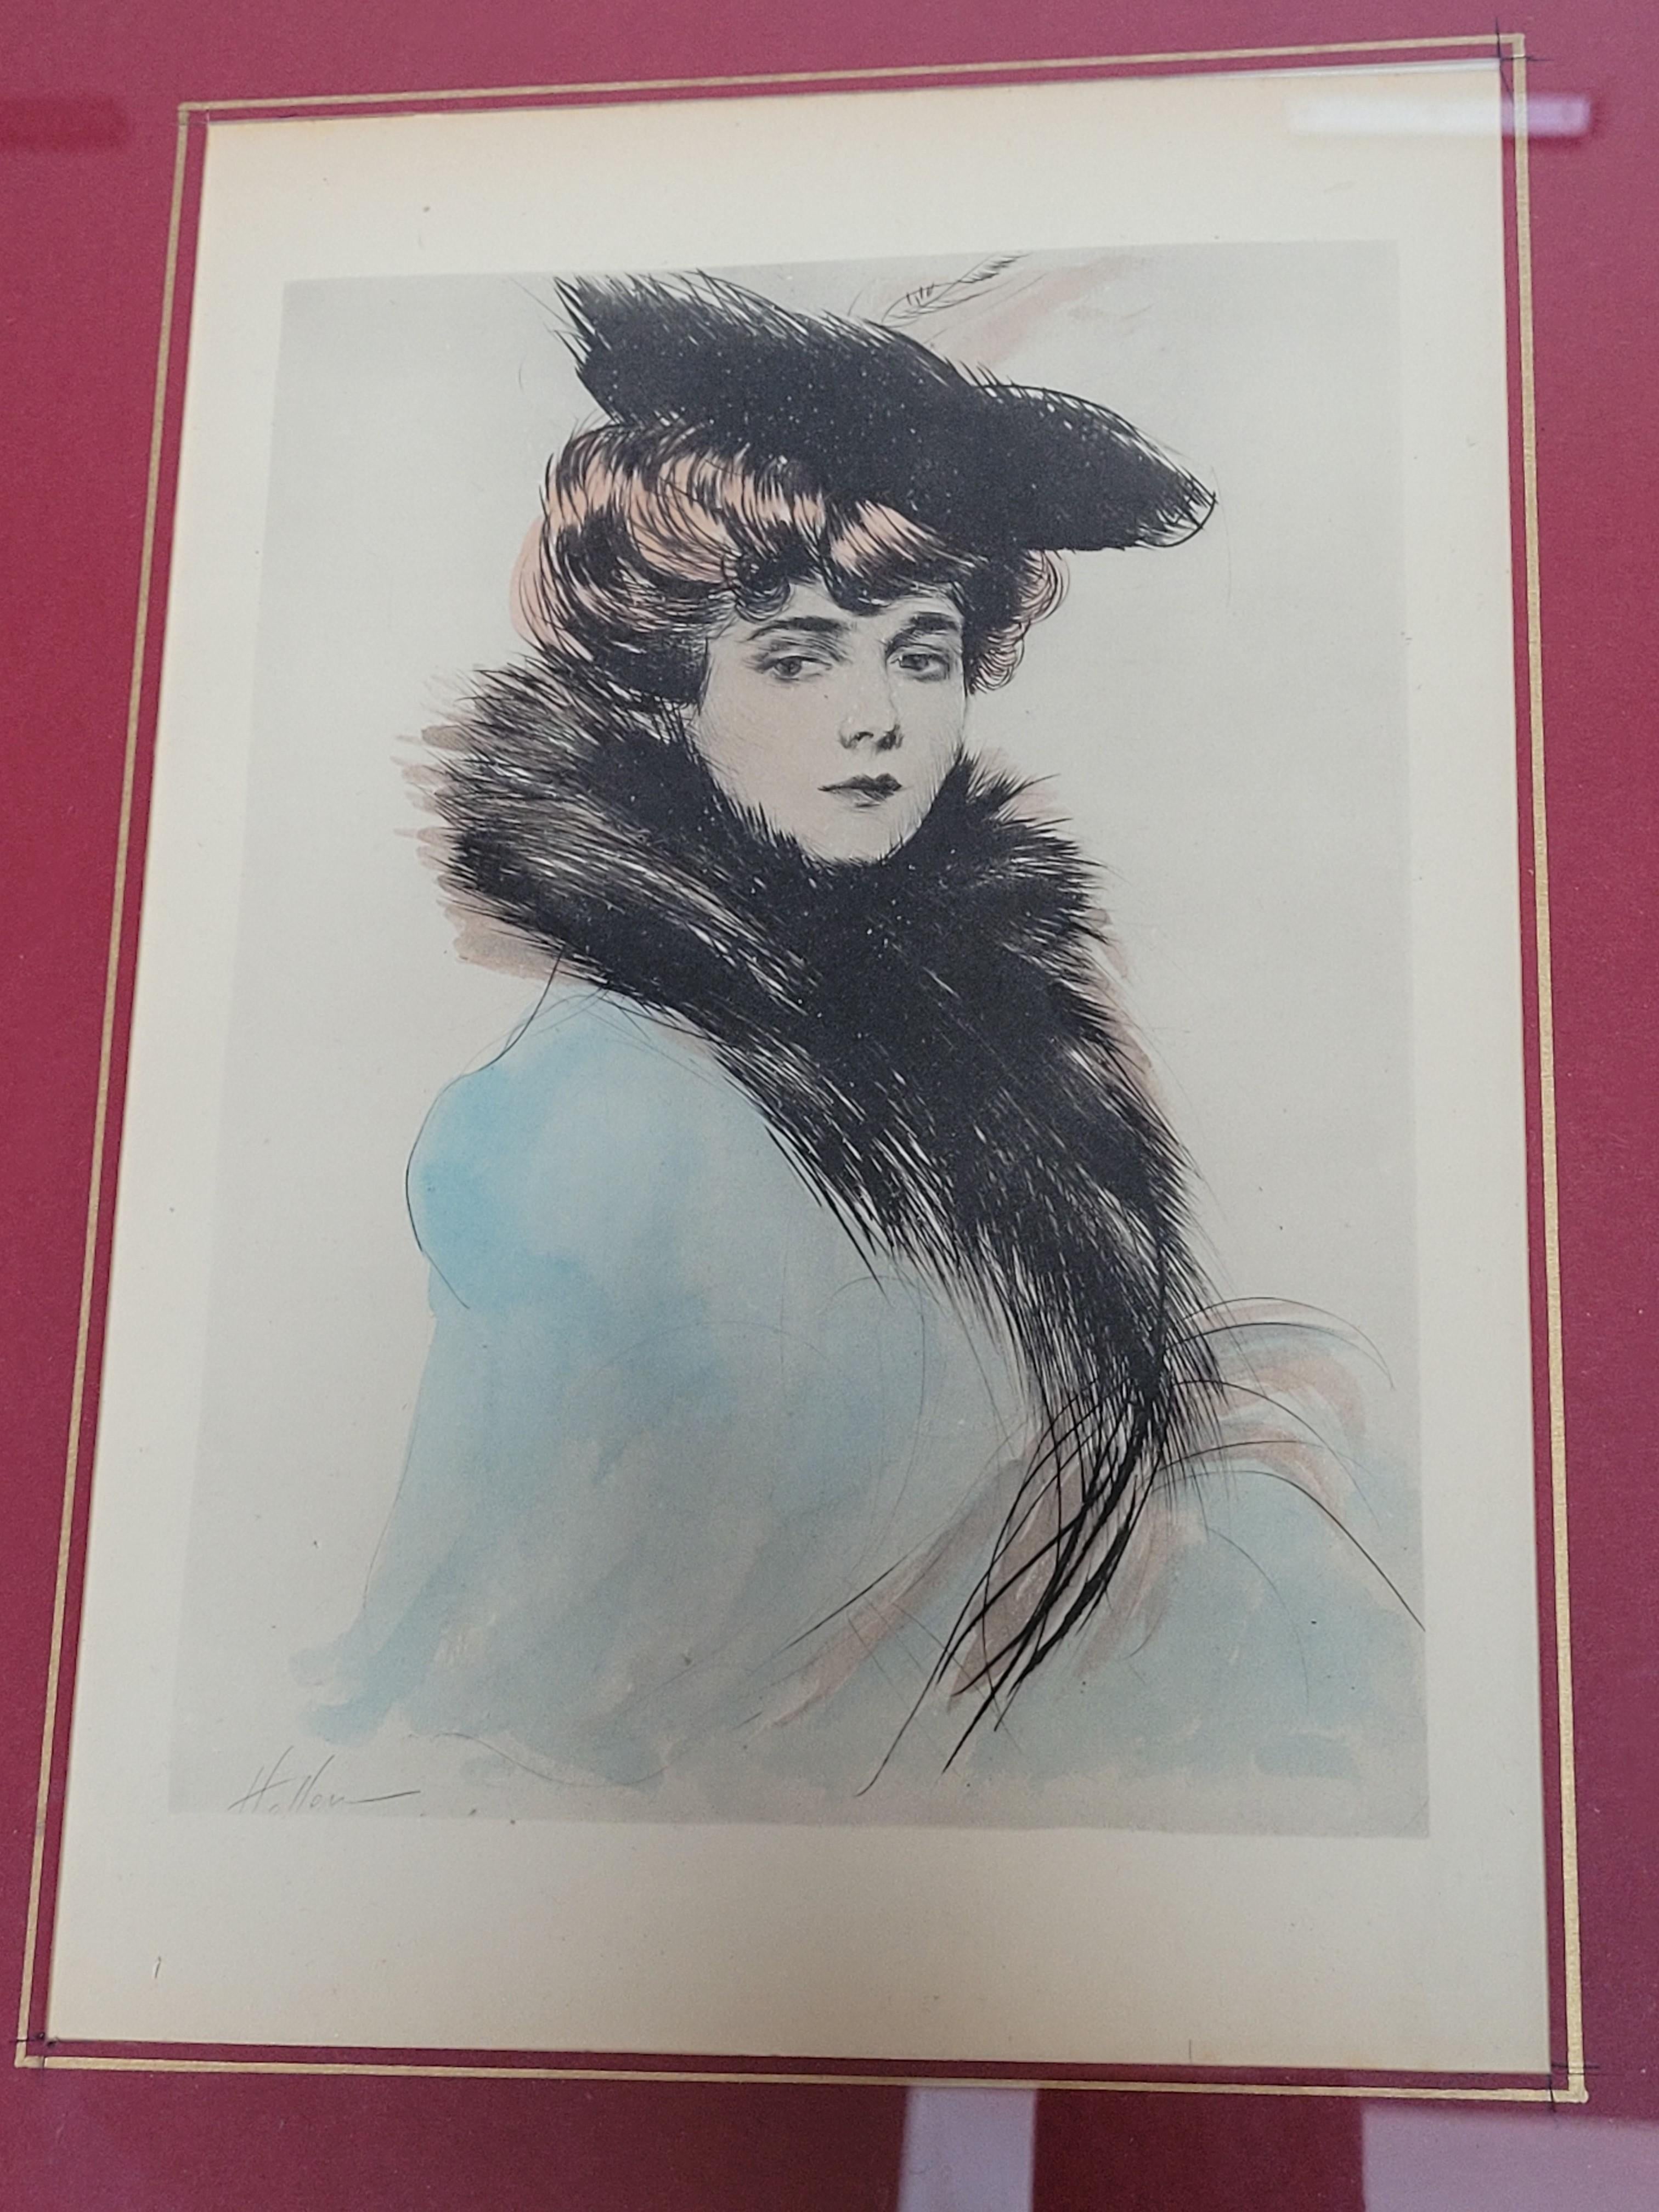 Watercolor lithograph presenting the portrait of Madame Chéruit, by the artist Paul César Helleu

Madame Chéruit was one of the first women to run a fashion house in Paris at the beginning of the 20th century, Place Vendôme. Her taste and